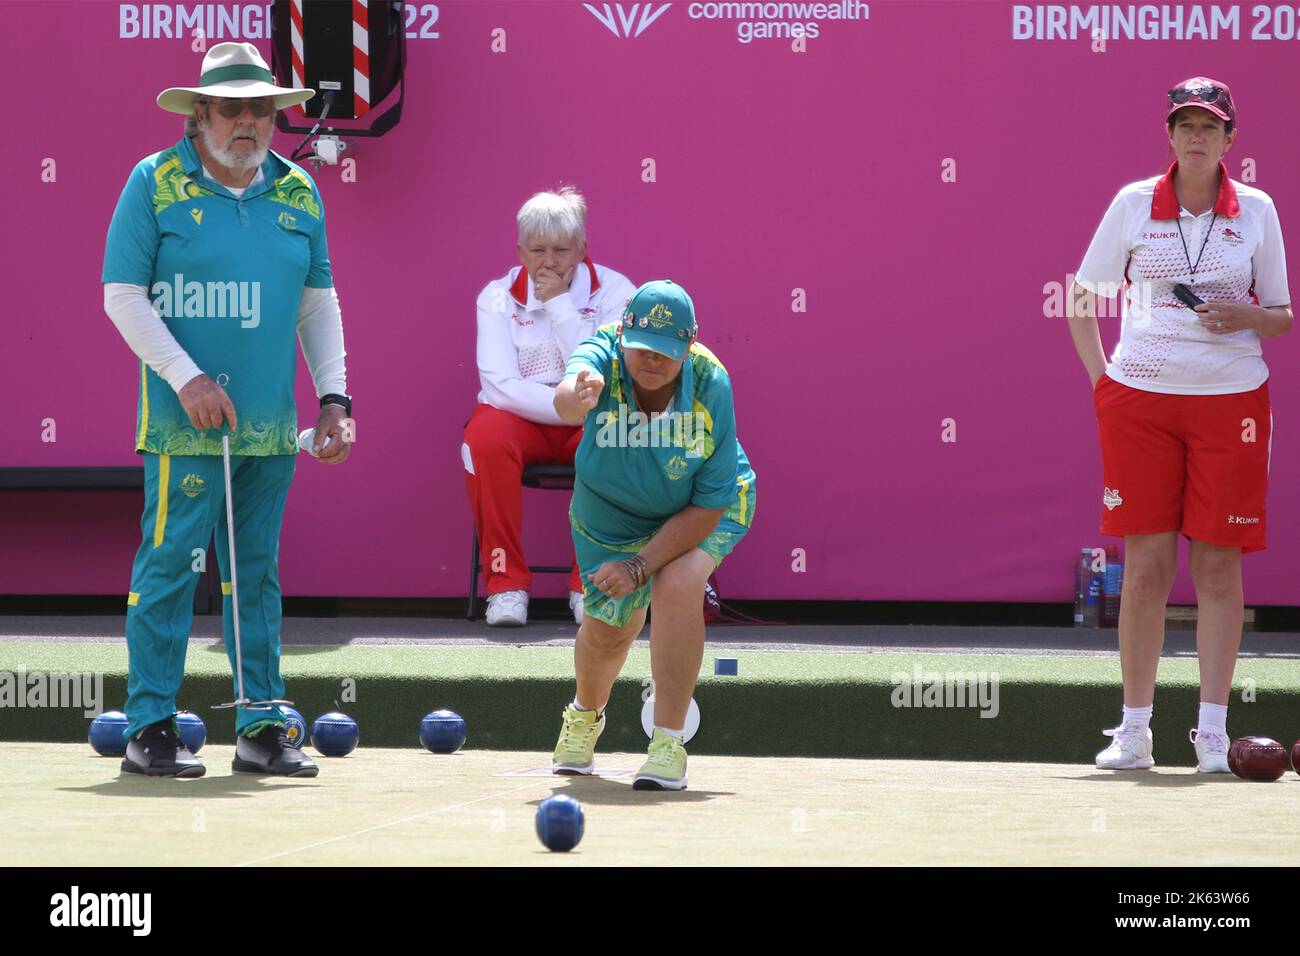 Helen BOARDMAN (Lead) of Australia (pictured) v England in the Para Mixed Pairs B2/B3 - Bronze Medal Match in the lawn bowls at the 2022 Commonwealth games at Victoria Park, Royal Leamington Spa. Stock Photo